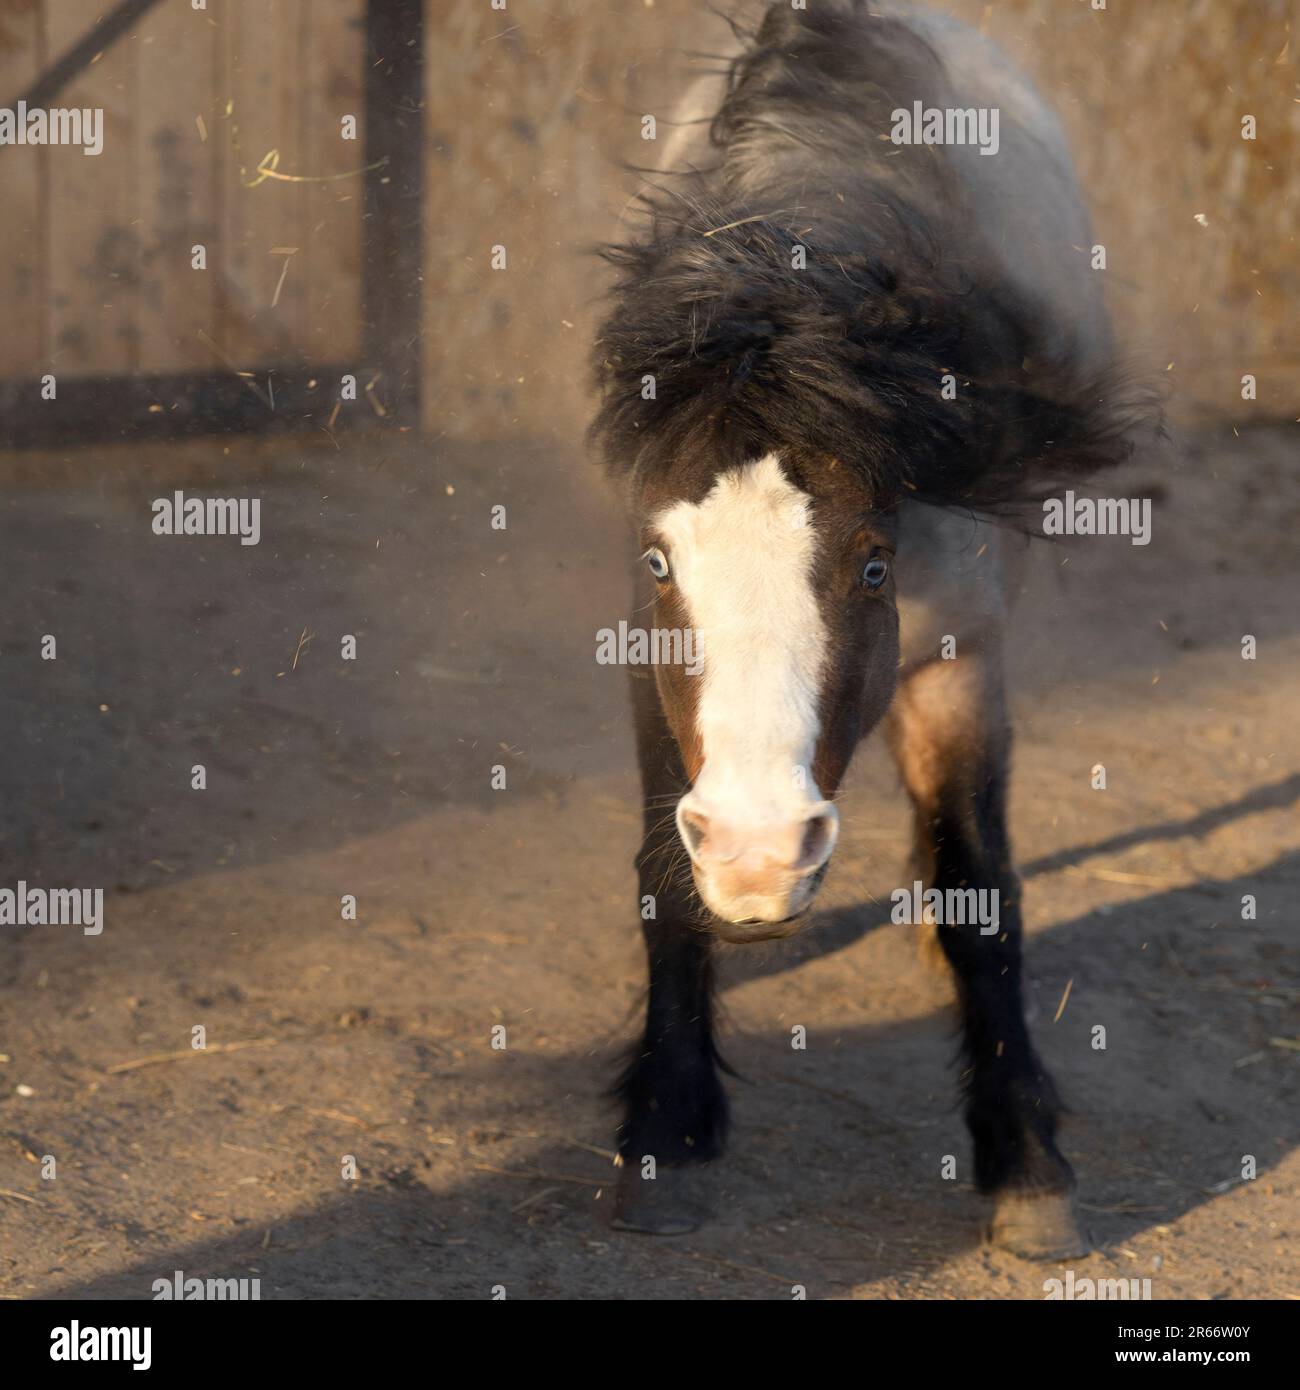 A piebald blue-eyed pony shakes off its neck and stands in a cloud of dust Stock Photo